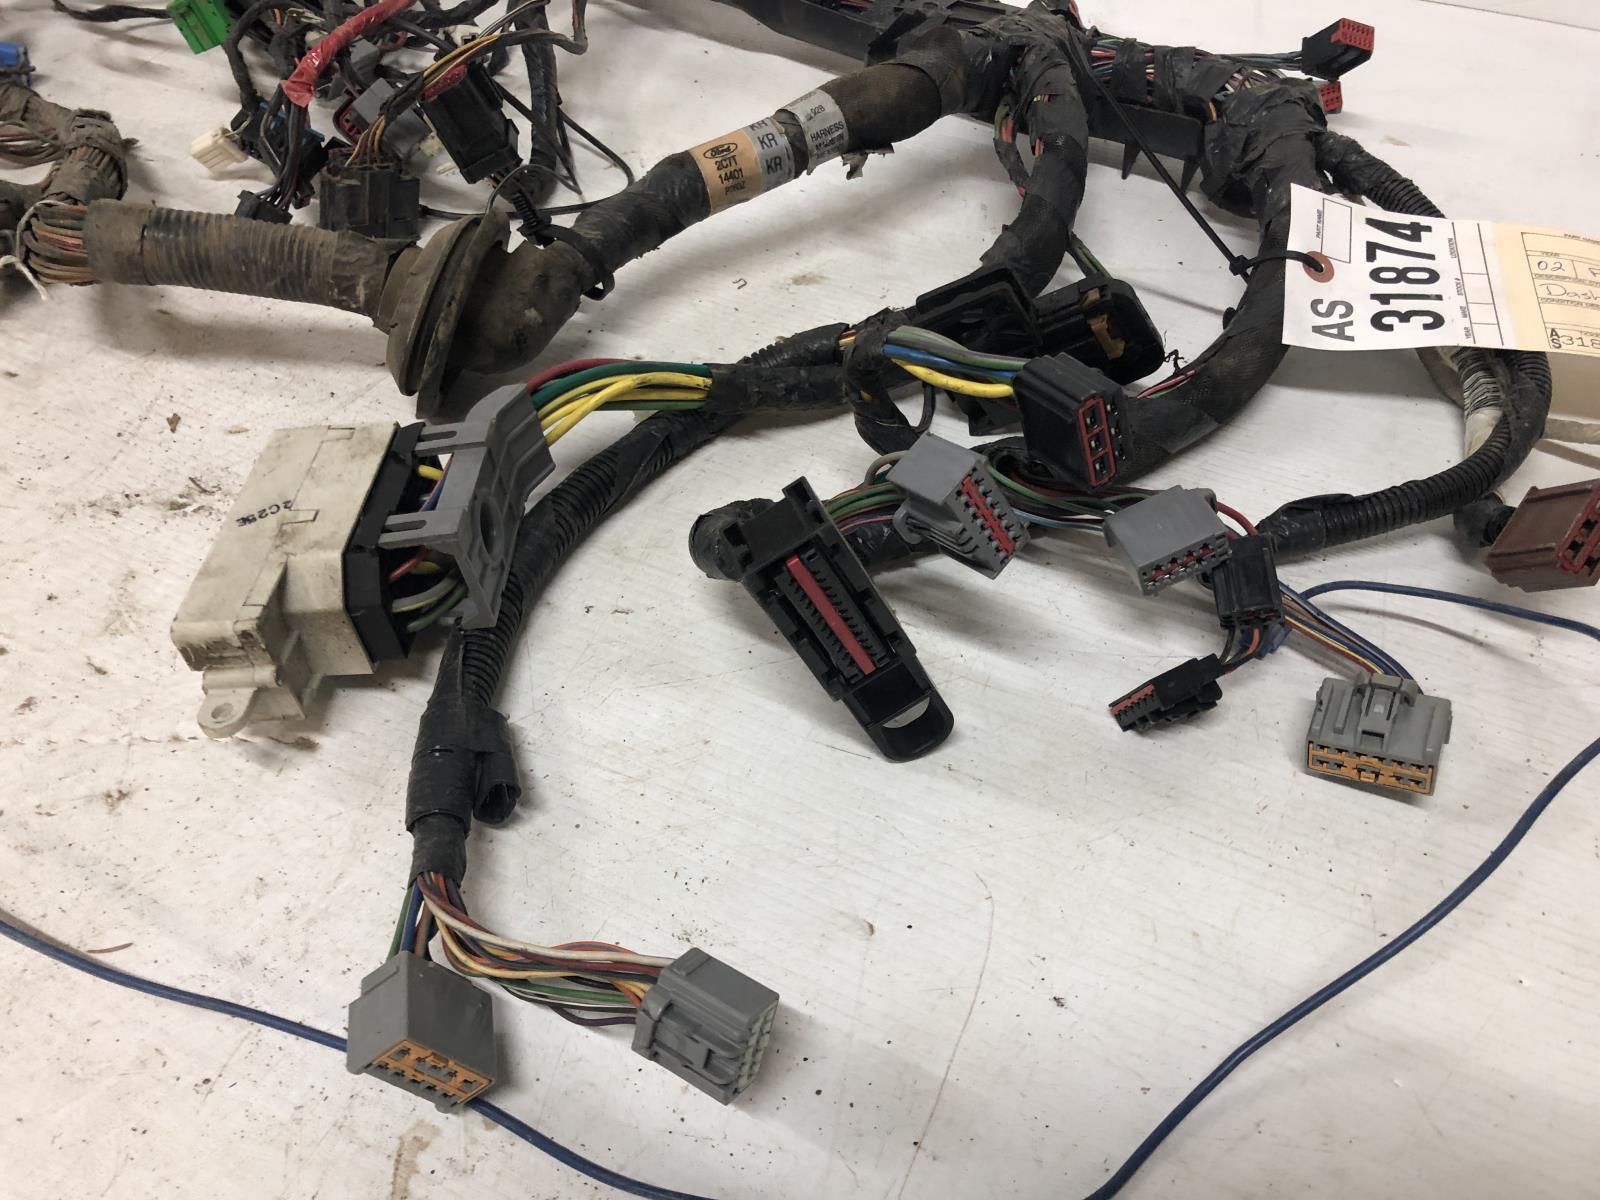 03 excursion wiring harness